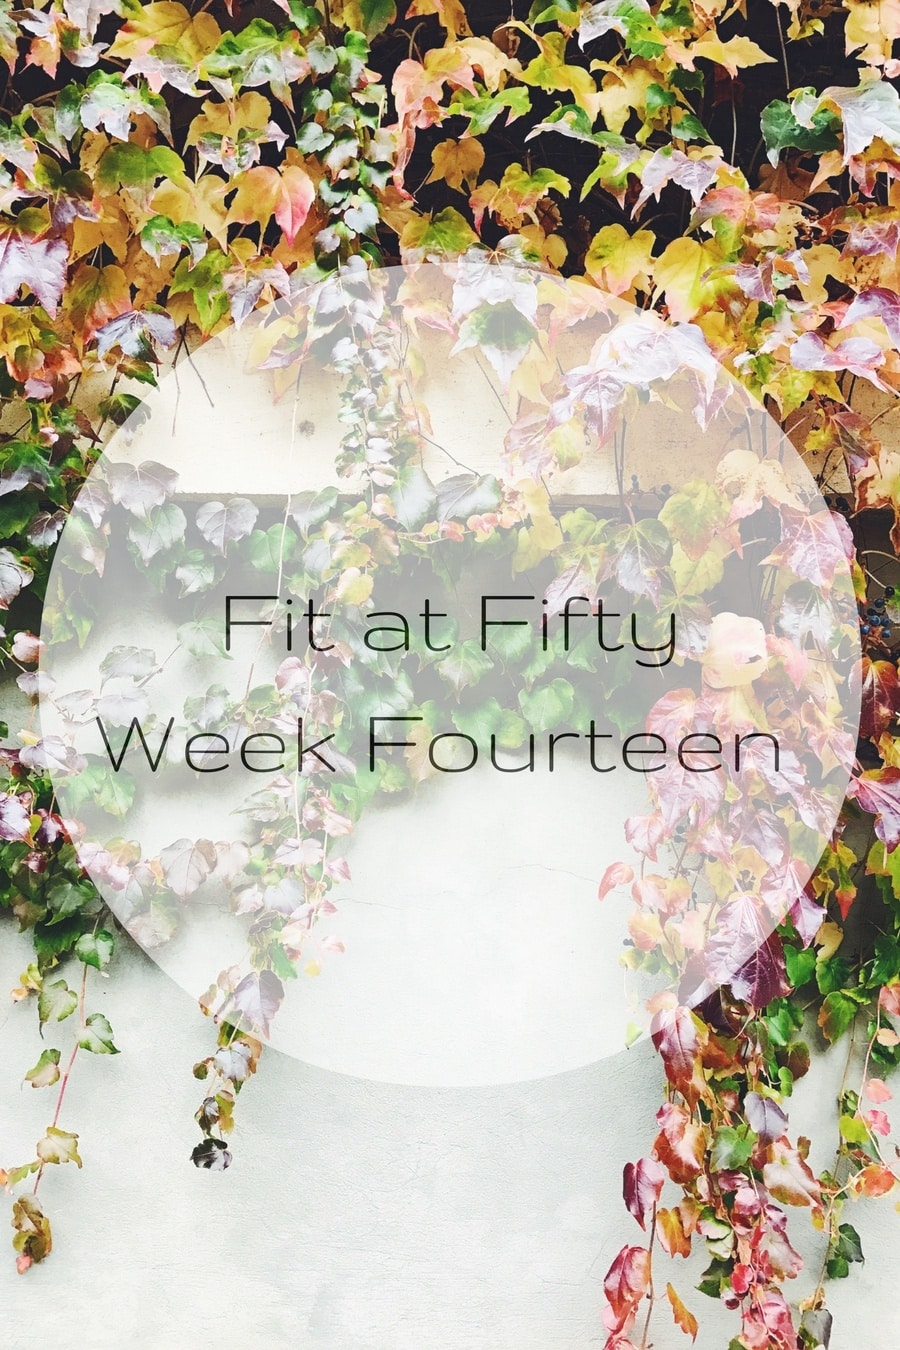 Fit at Fifty Week Fourteen